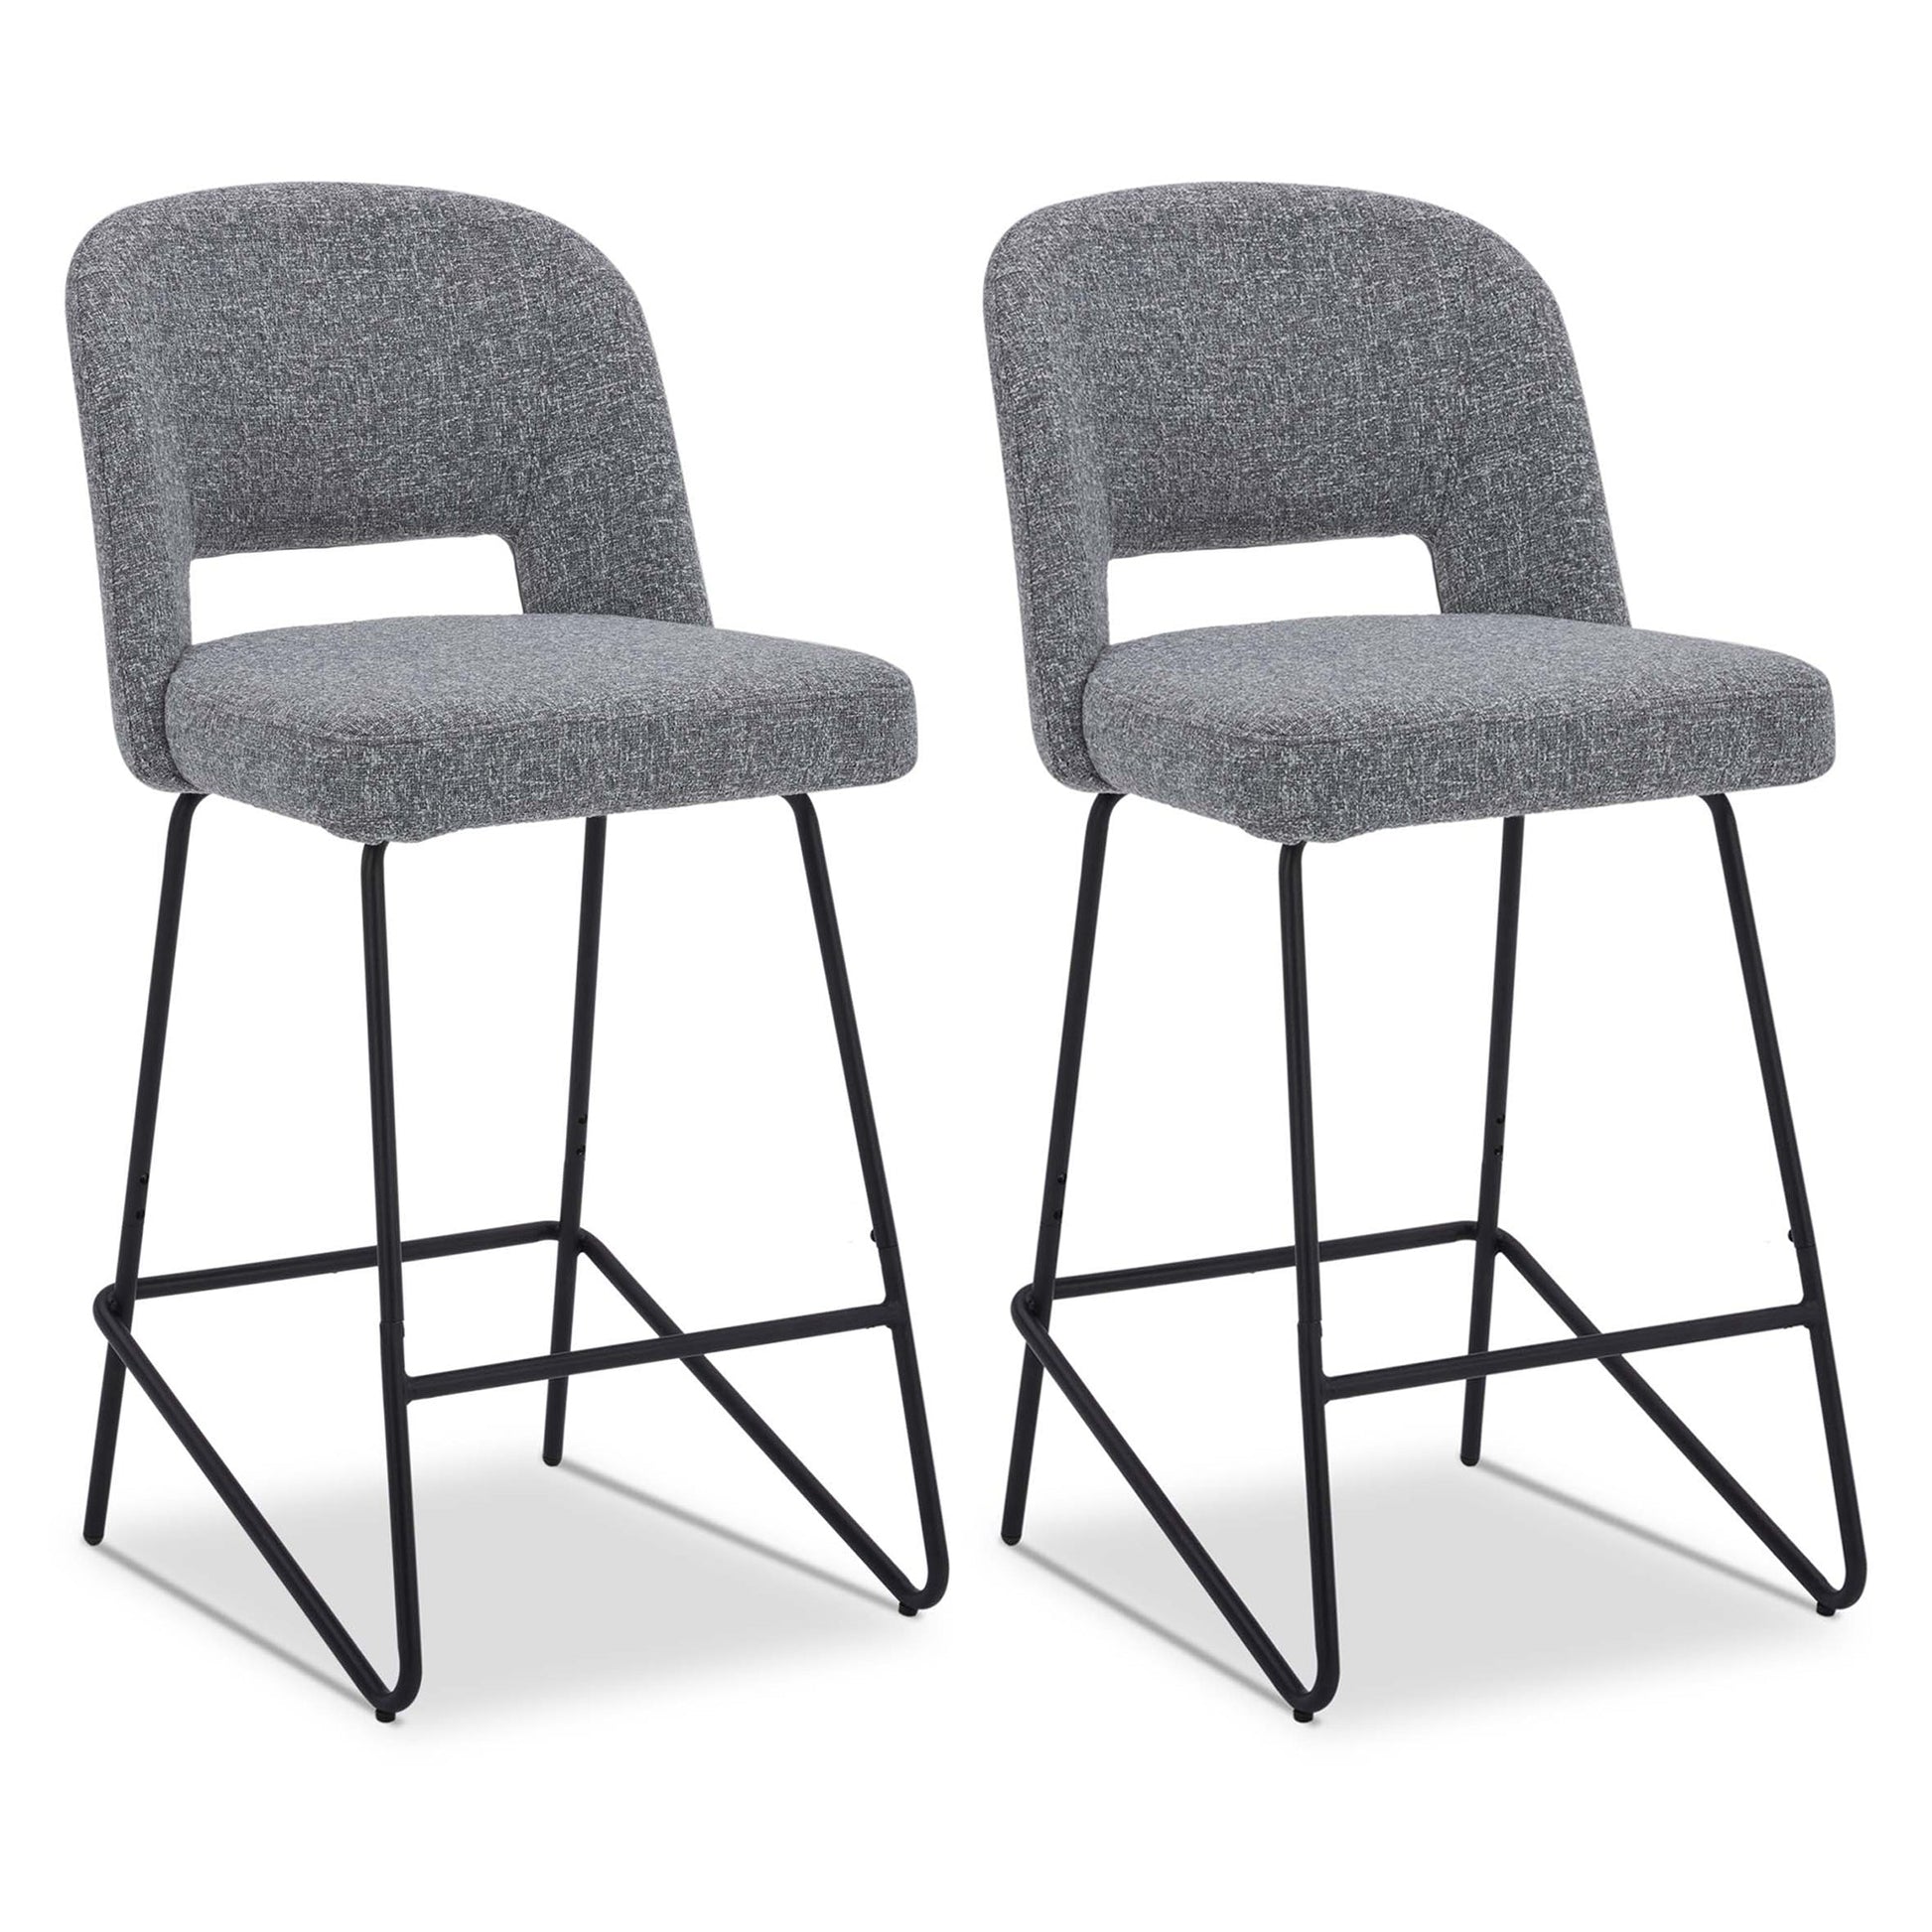 CHITA LIVING-Willow Modern Counter Stool with Airy Back (Set of 2)-Counter Stools-Fabric-Gray (Multi-colored)-